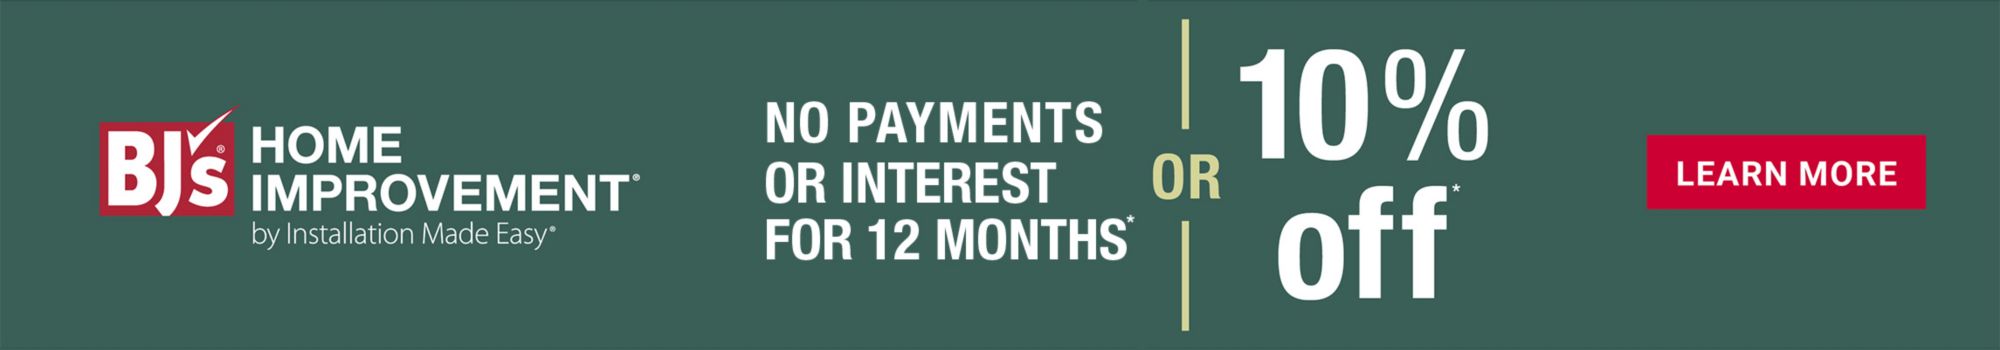 BJ's Home Improvement, No Payments Or Interest For 12 Months or 10% Off.  Click to Learn More.